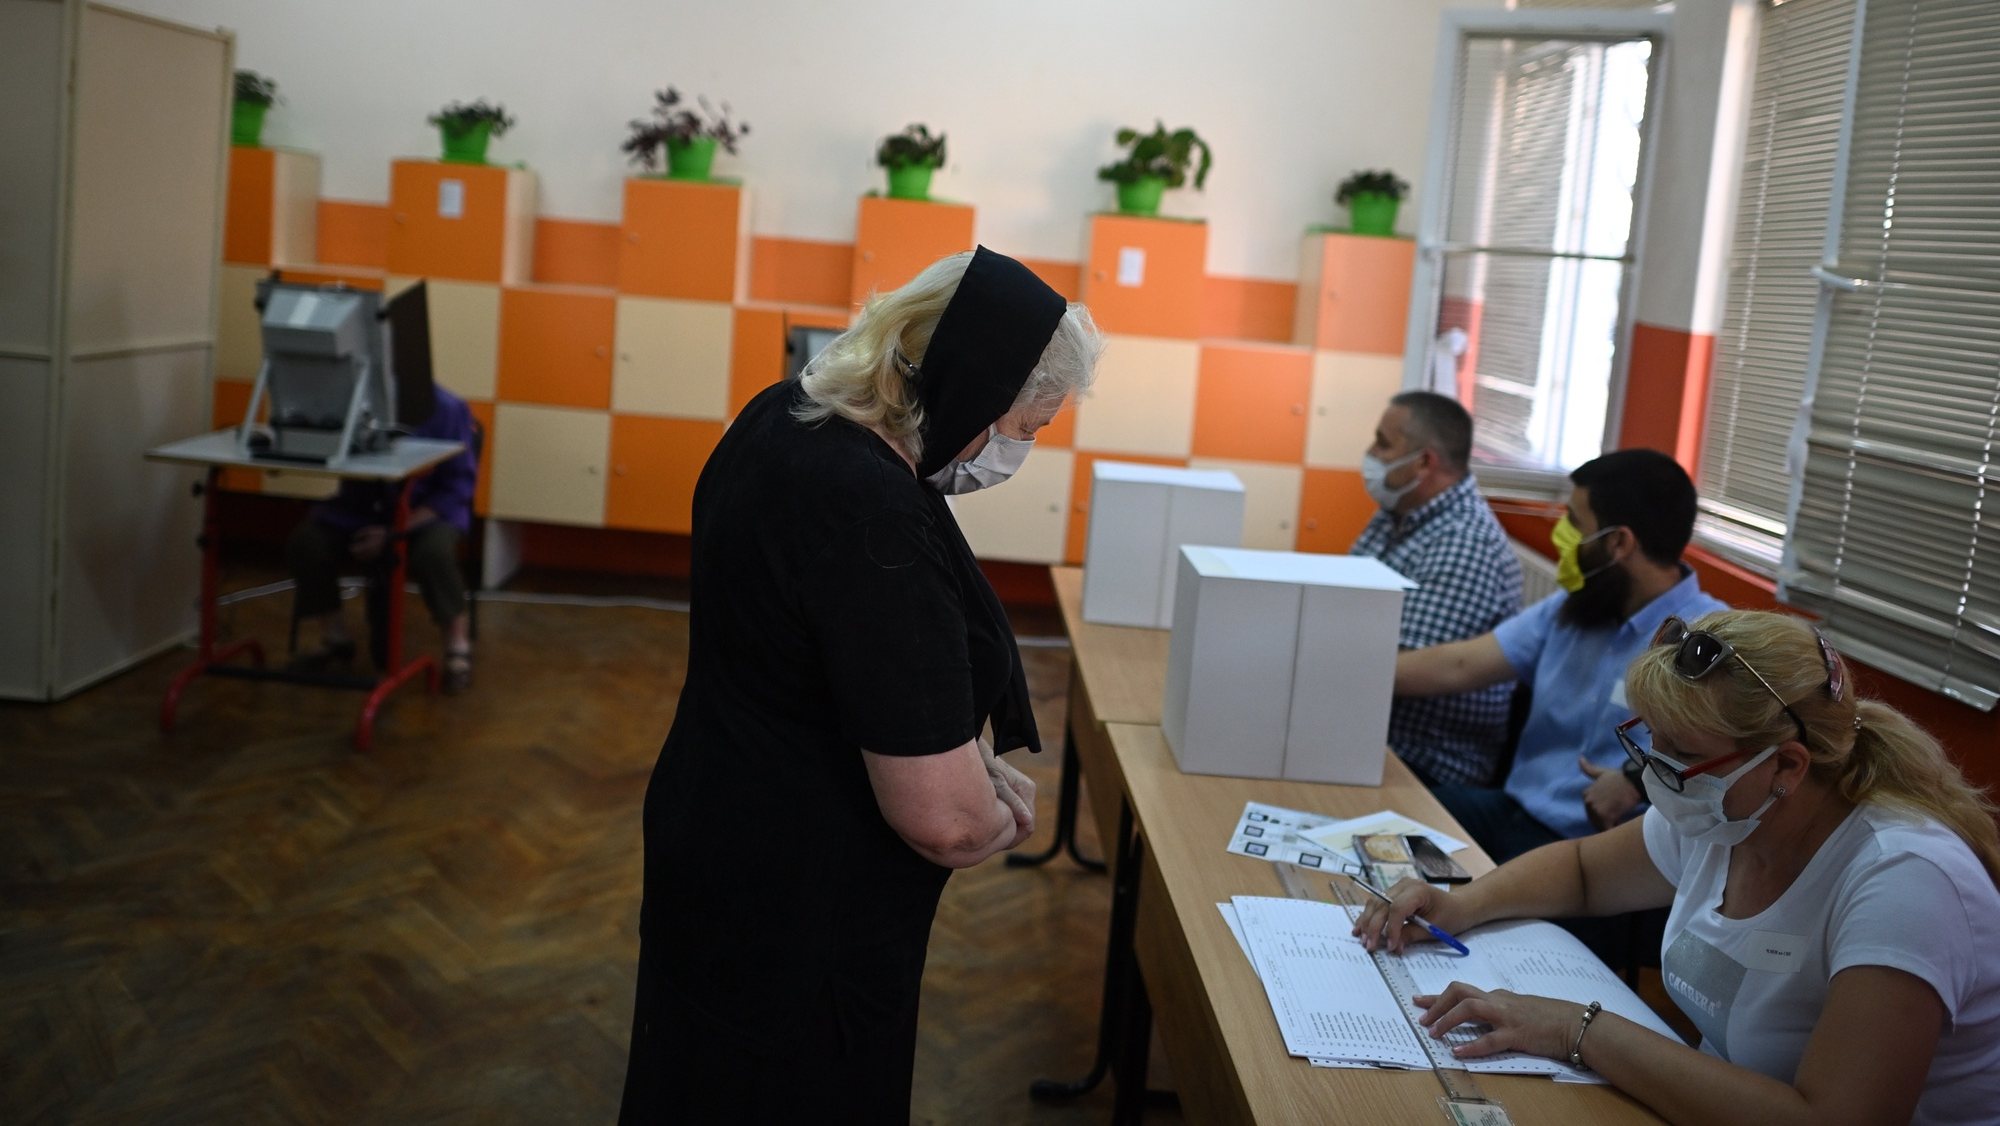 epa09336554 People cast their vote at a polling station during the country&#039;s parliamentary elections in Sofia, Bulgaria, 11 July 2021. Until the polls close at 8:00 p.m. (5:00 p.m. GMT), voters will be able to choose between 23 parties and alliances, seven fewer than the previous 04 April legislatures, to form the new 240-seat Parliament. Victory will be contested by the conservatives of the Bulgarian Citizens for European Development (GERB), led by former Prime Minister Boyko Borissov, and by There Is Such a People, a political party recently founded by singer and television host Slavi Trifonov.  EPA/VASSIL DONEV